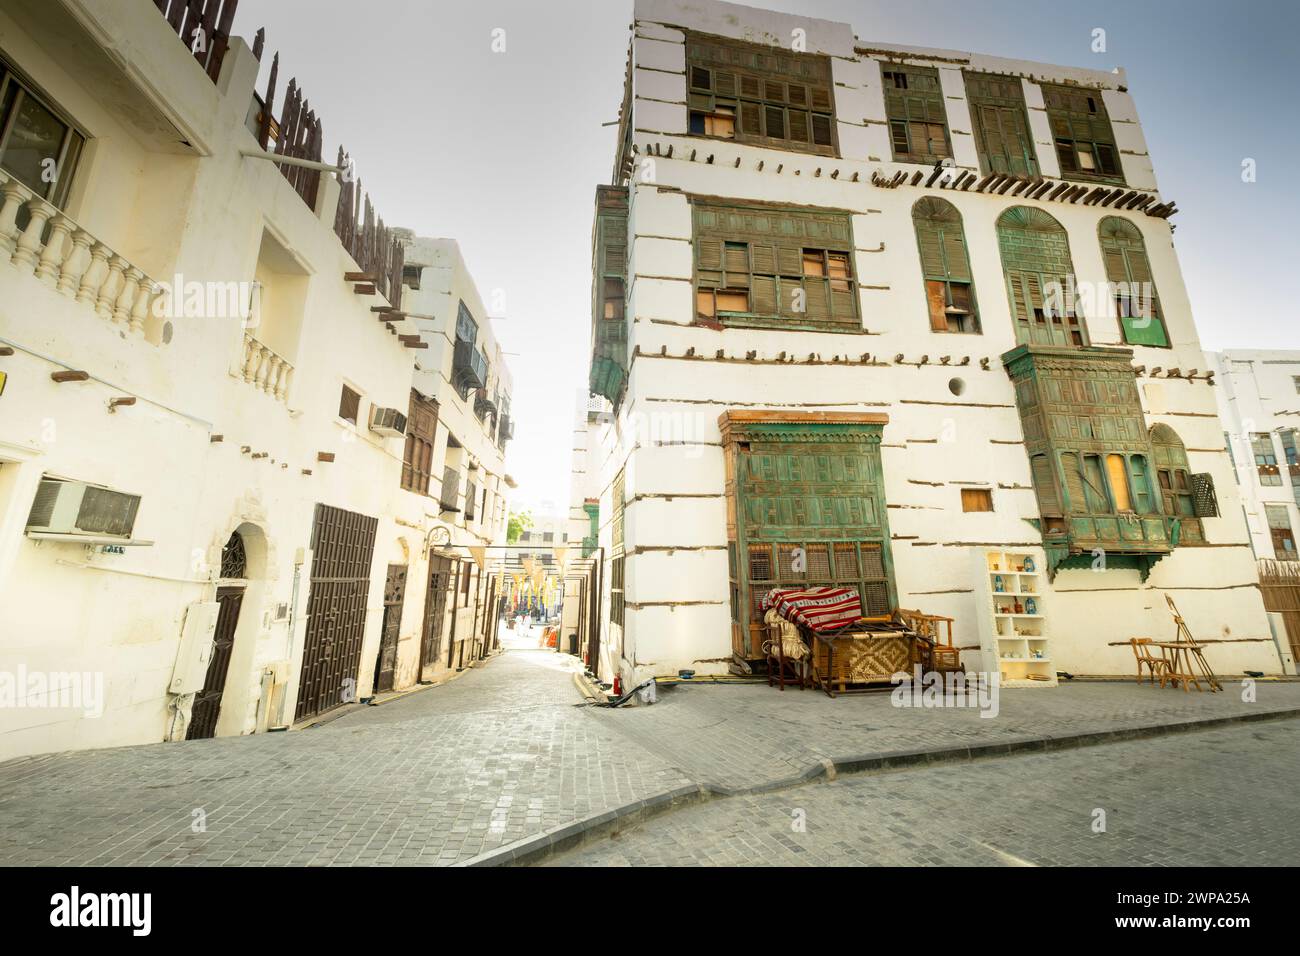 Traditional house decoration. The unique architecture of the medieval Arab city. Jeddah, Saudi Arabia Stock Photo